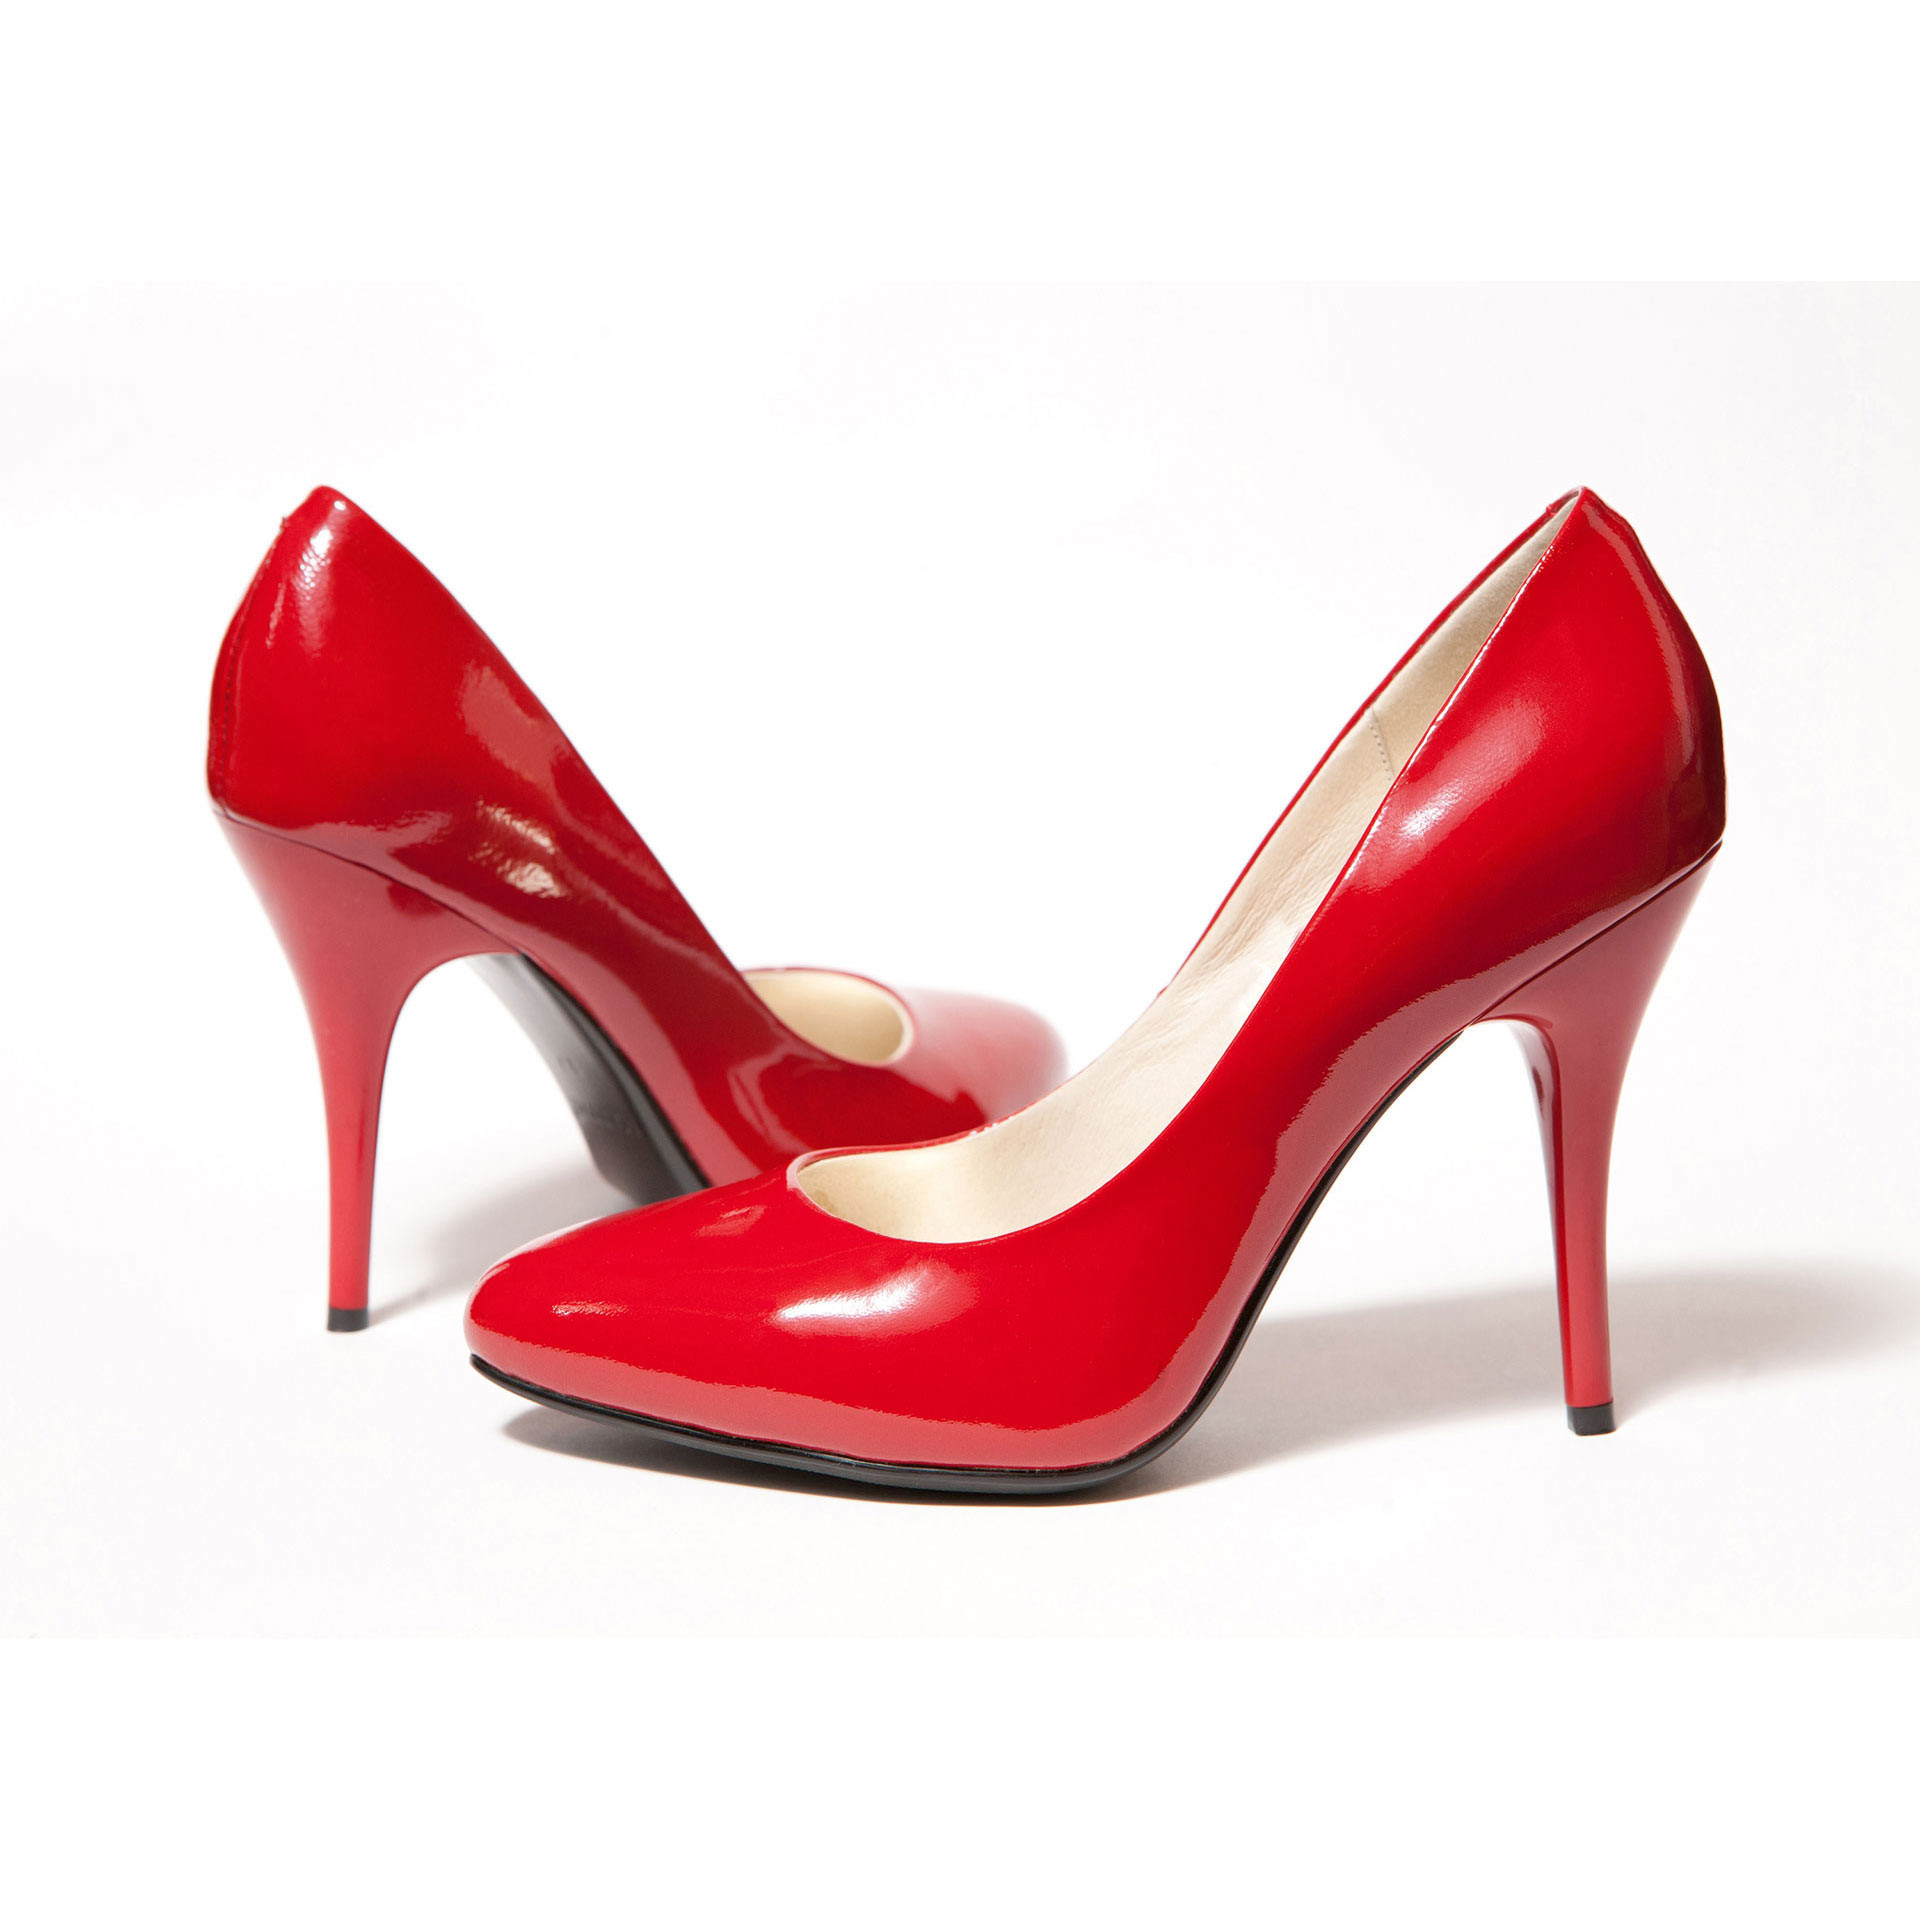 1920x1920 Red-high-heel-women-shoes-on-white-background